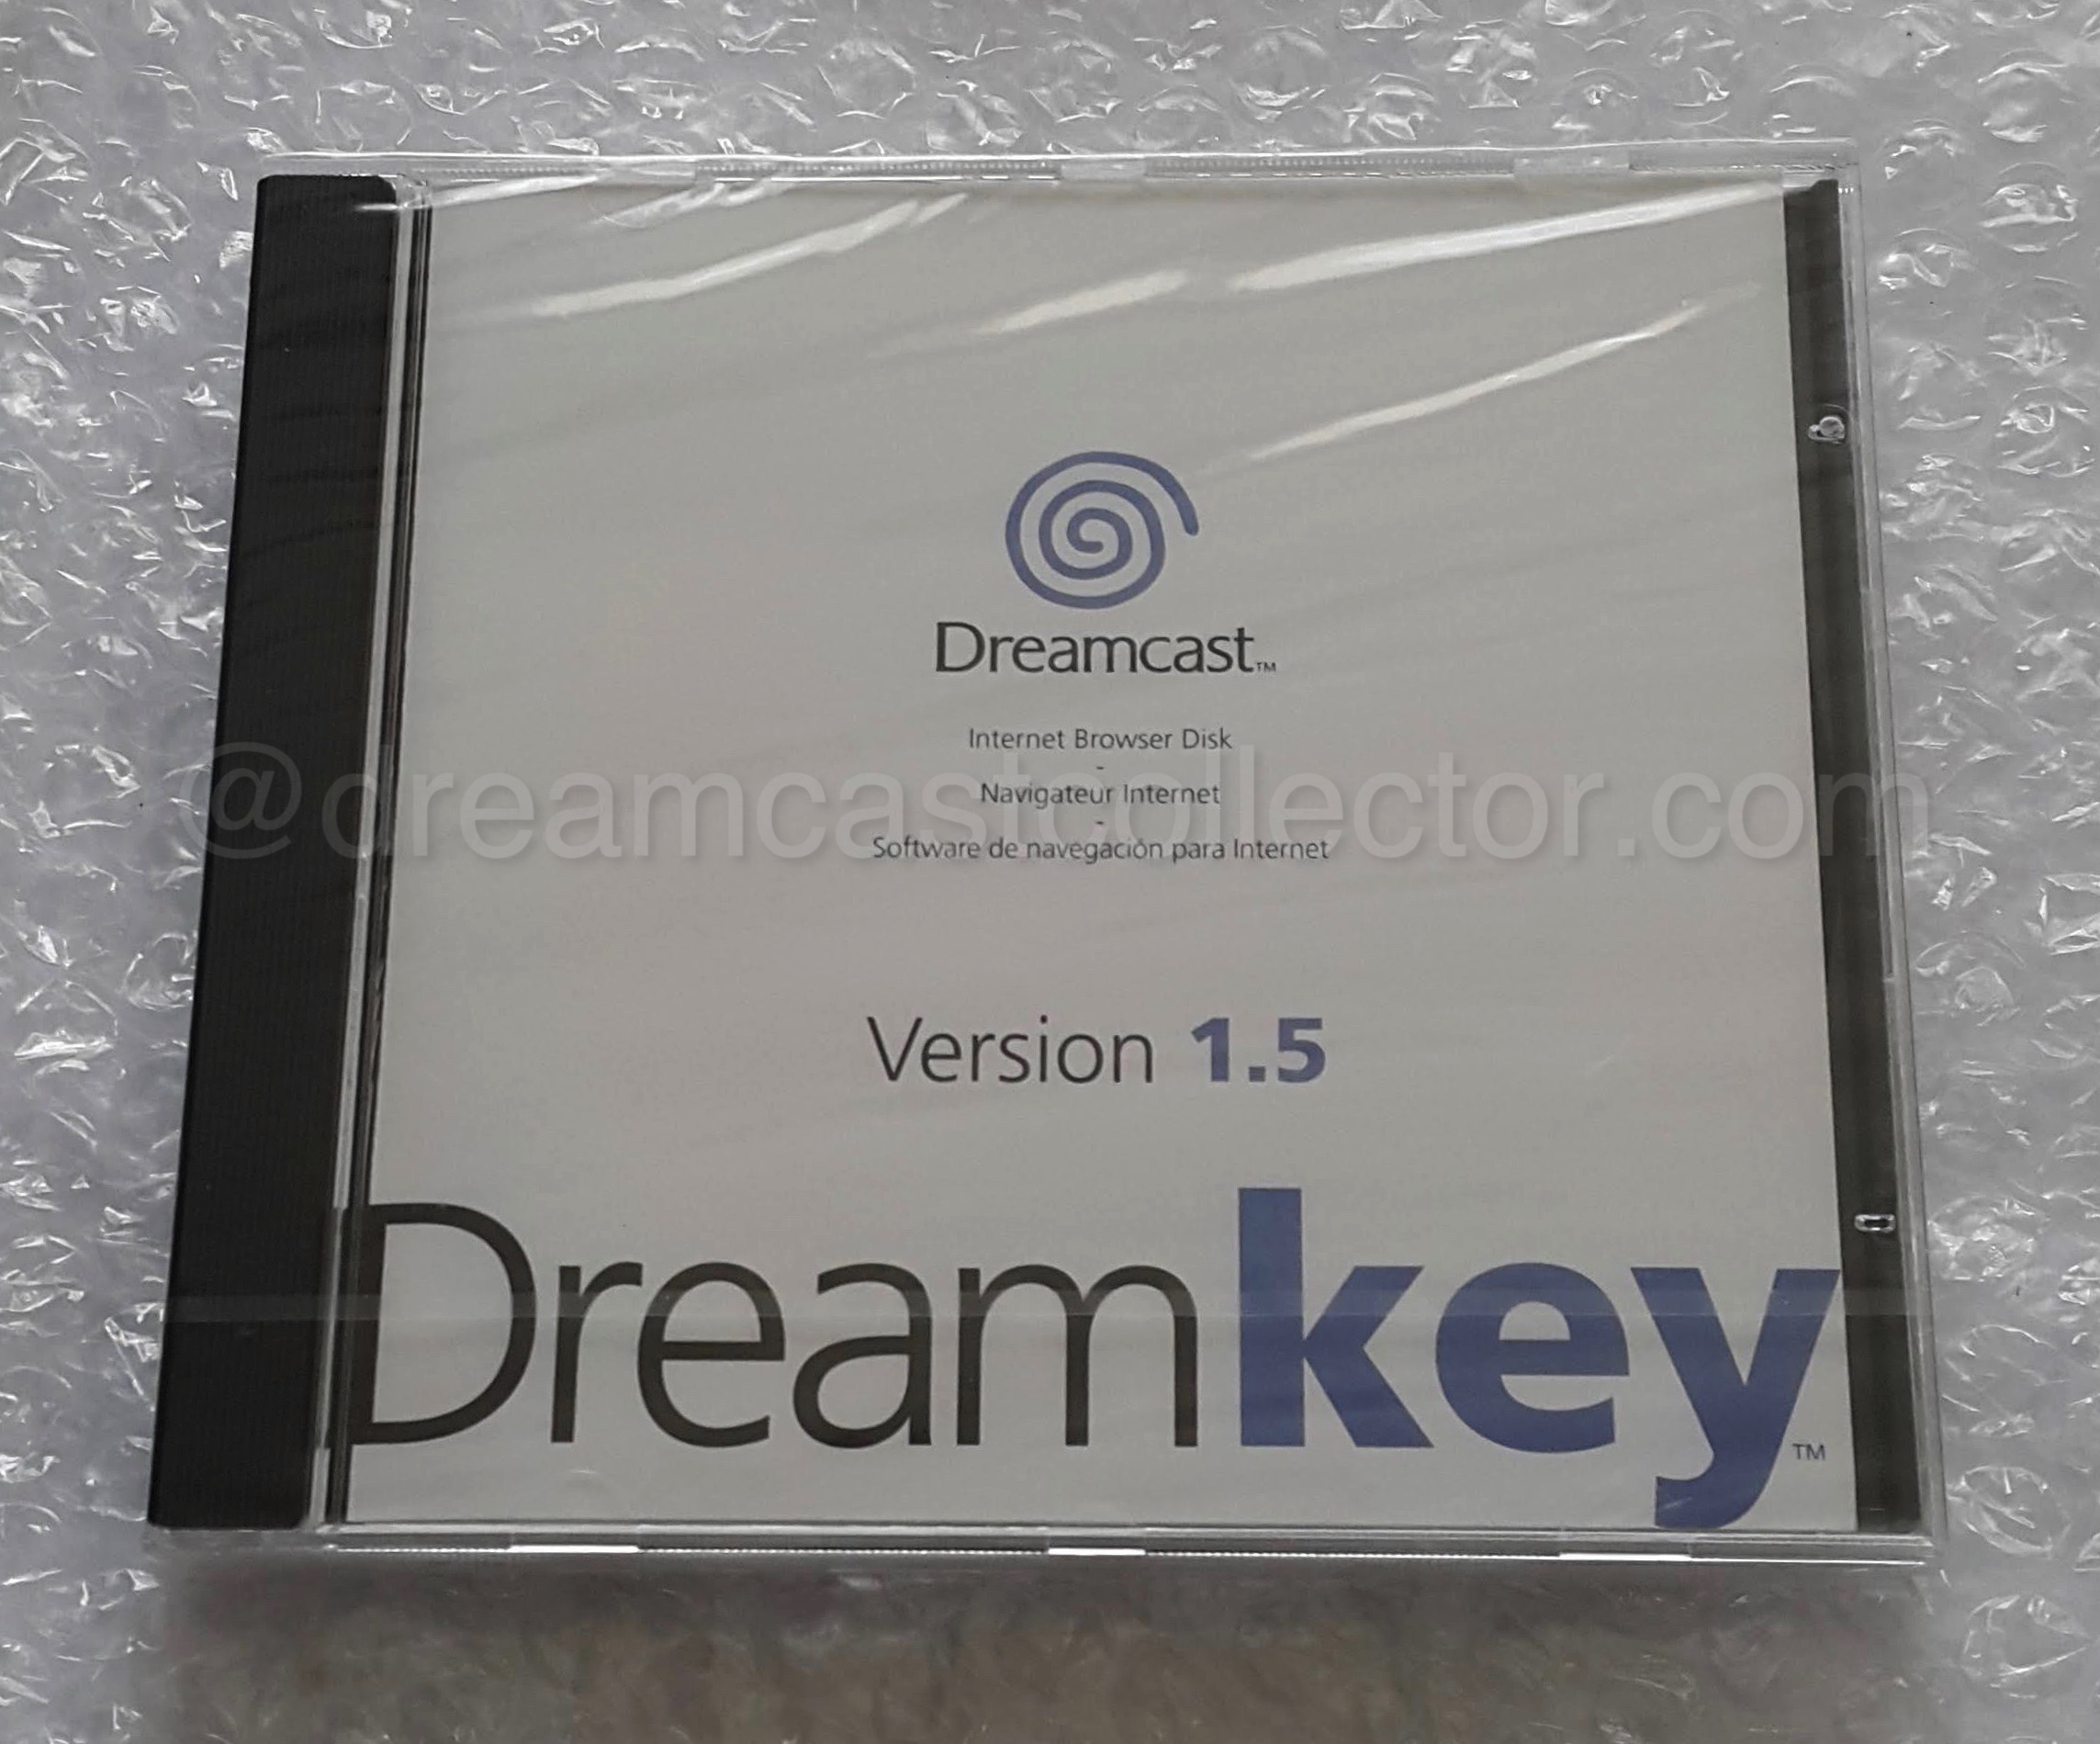 The first major revision of the PAL browser was the DreamKey 1.5 iteration which allowed gamers in the Republic of Ireland access to SEGA Europe’s network infrastructure. This version also represented the last of the PAL browsers that was produced in Japan exclusively for the European region. Two further DreamKey discs were produced in Japan but they were restricted to smaller or emerging markets. Like the previous incarnation the updated 1.5 version was released in two separate editions.